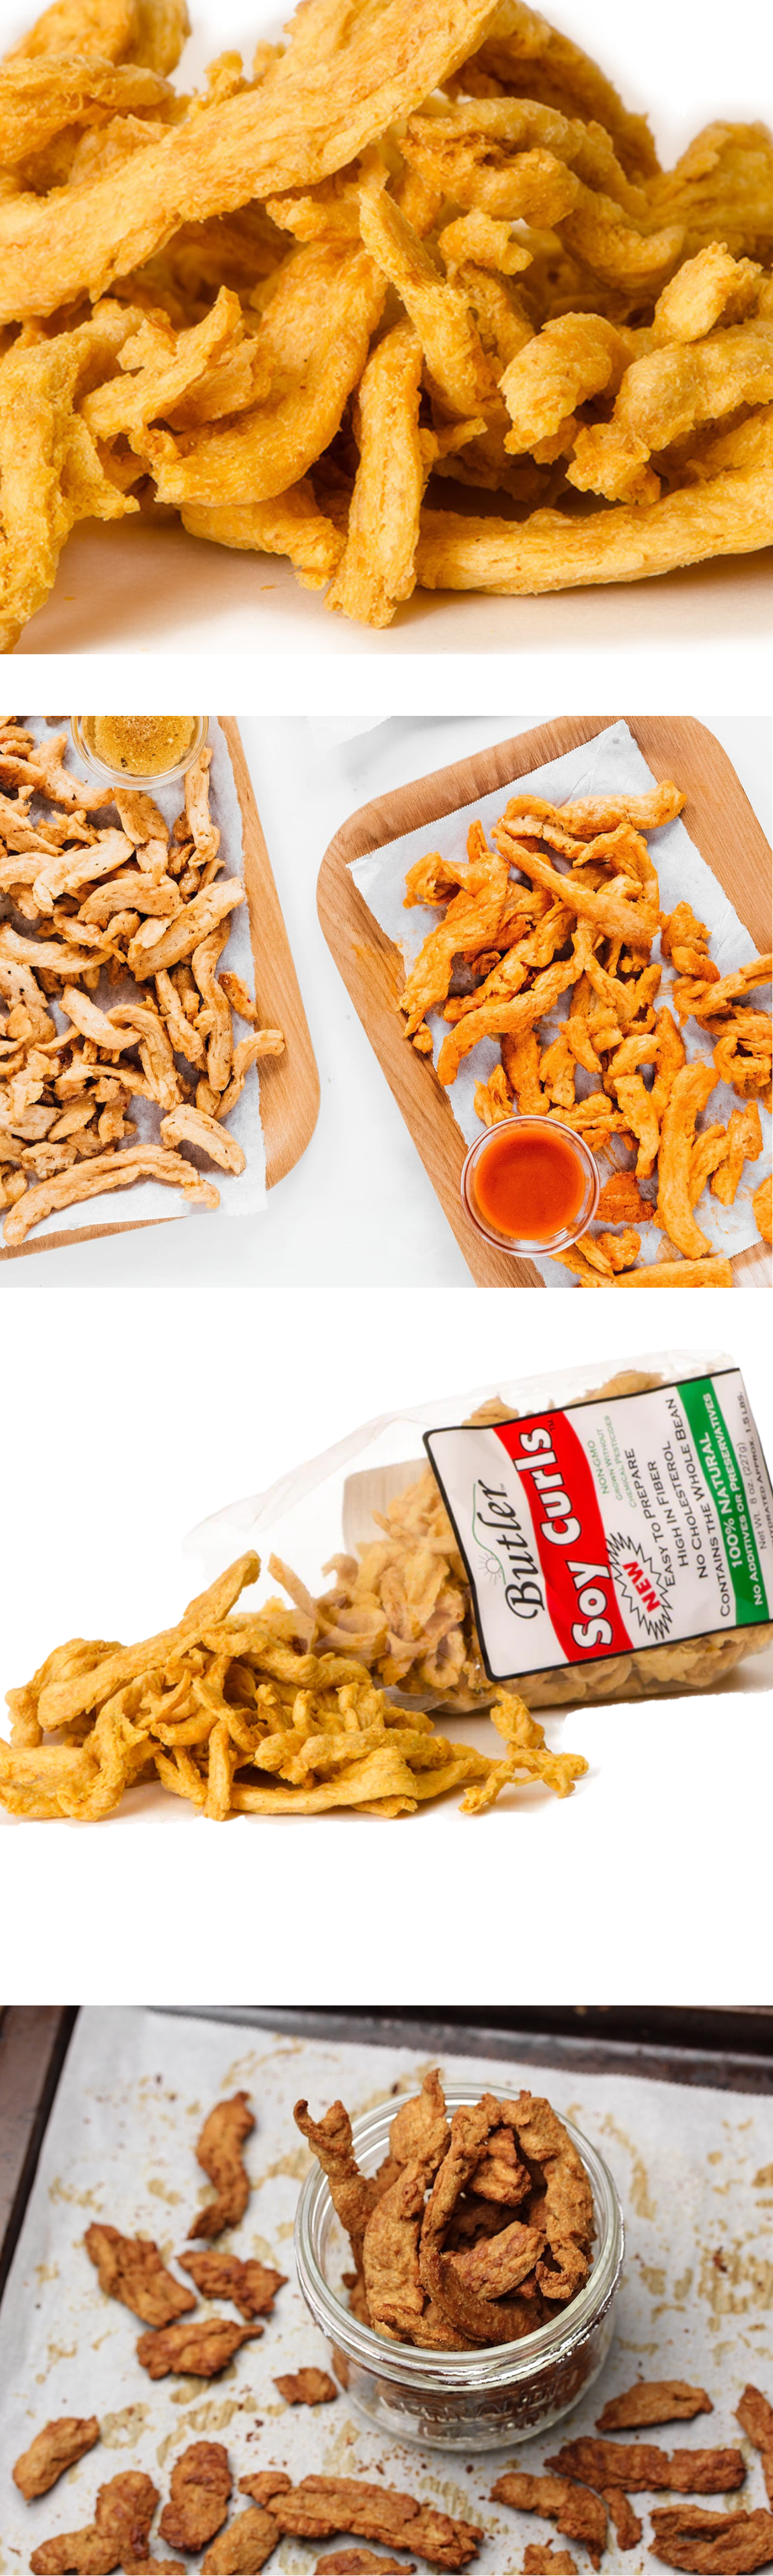 are soy curls healthy?